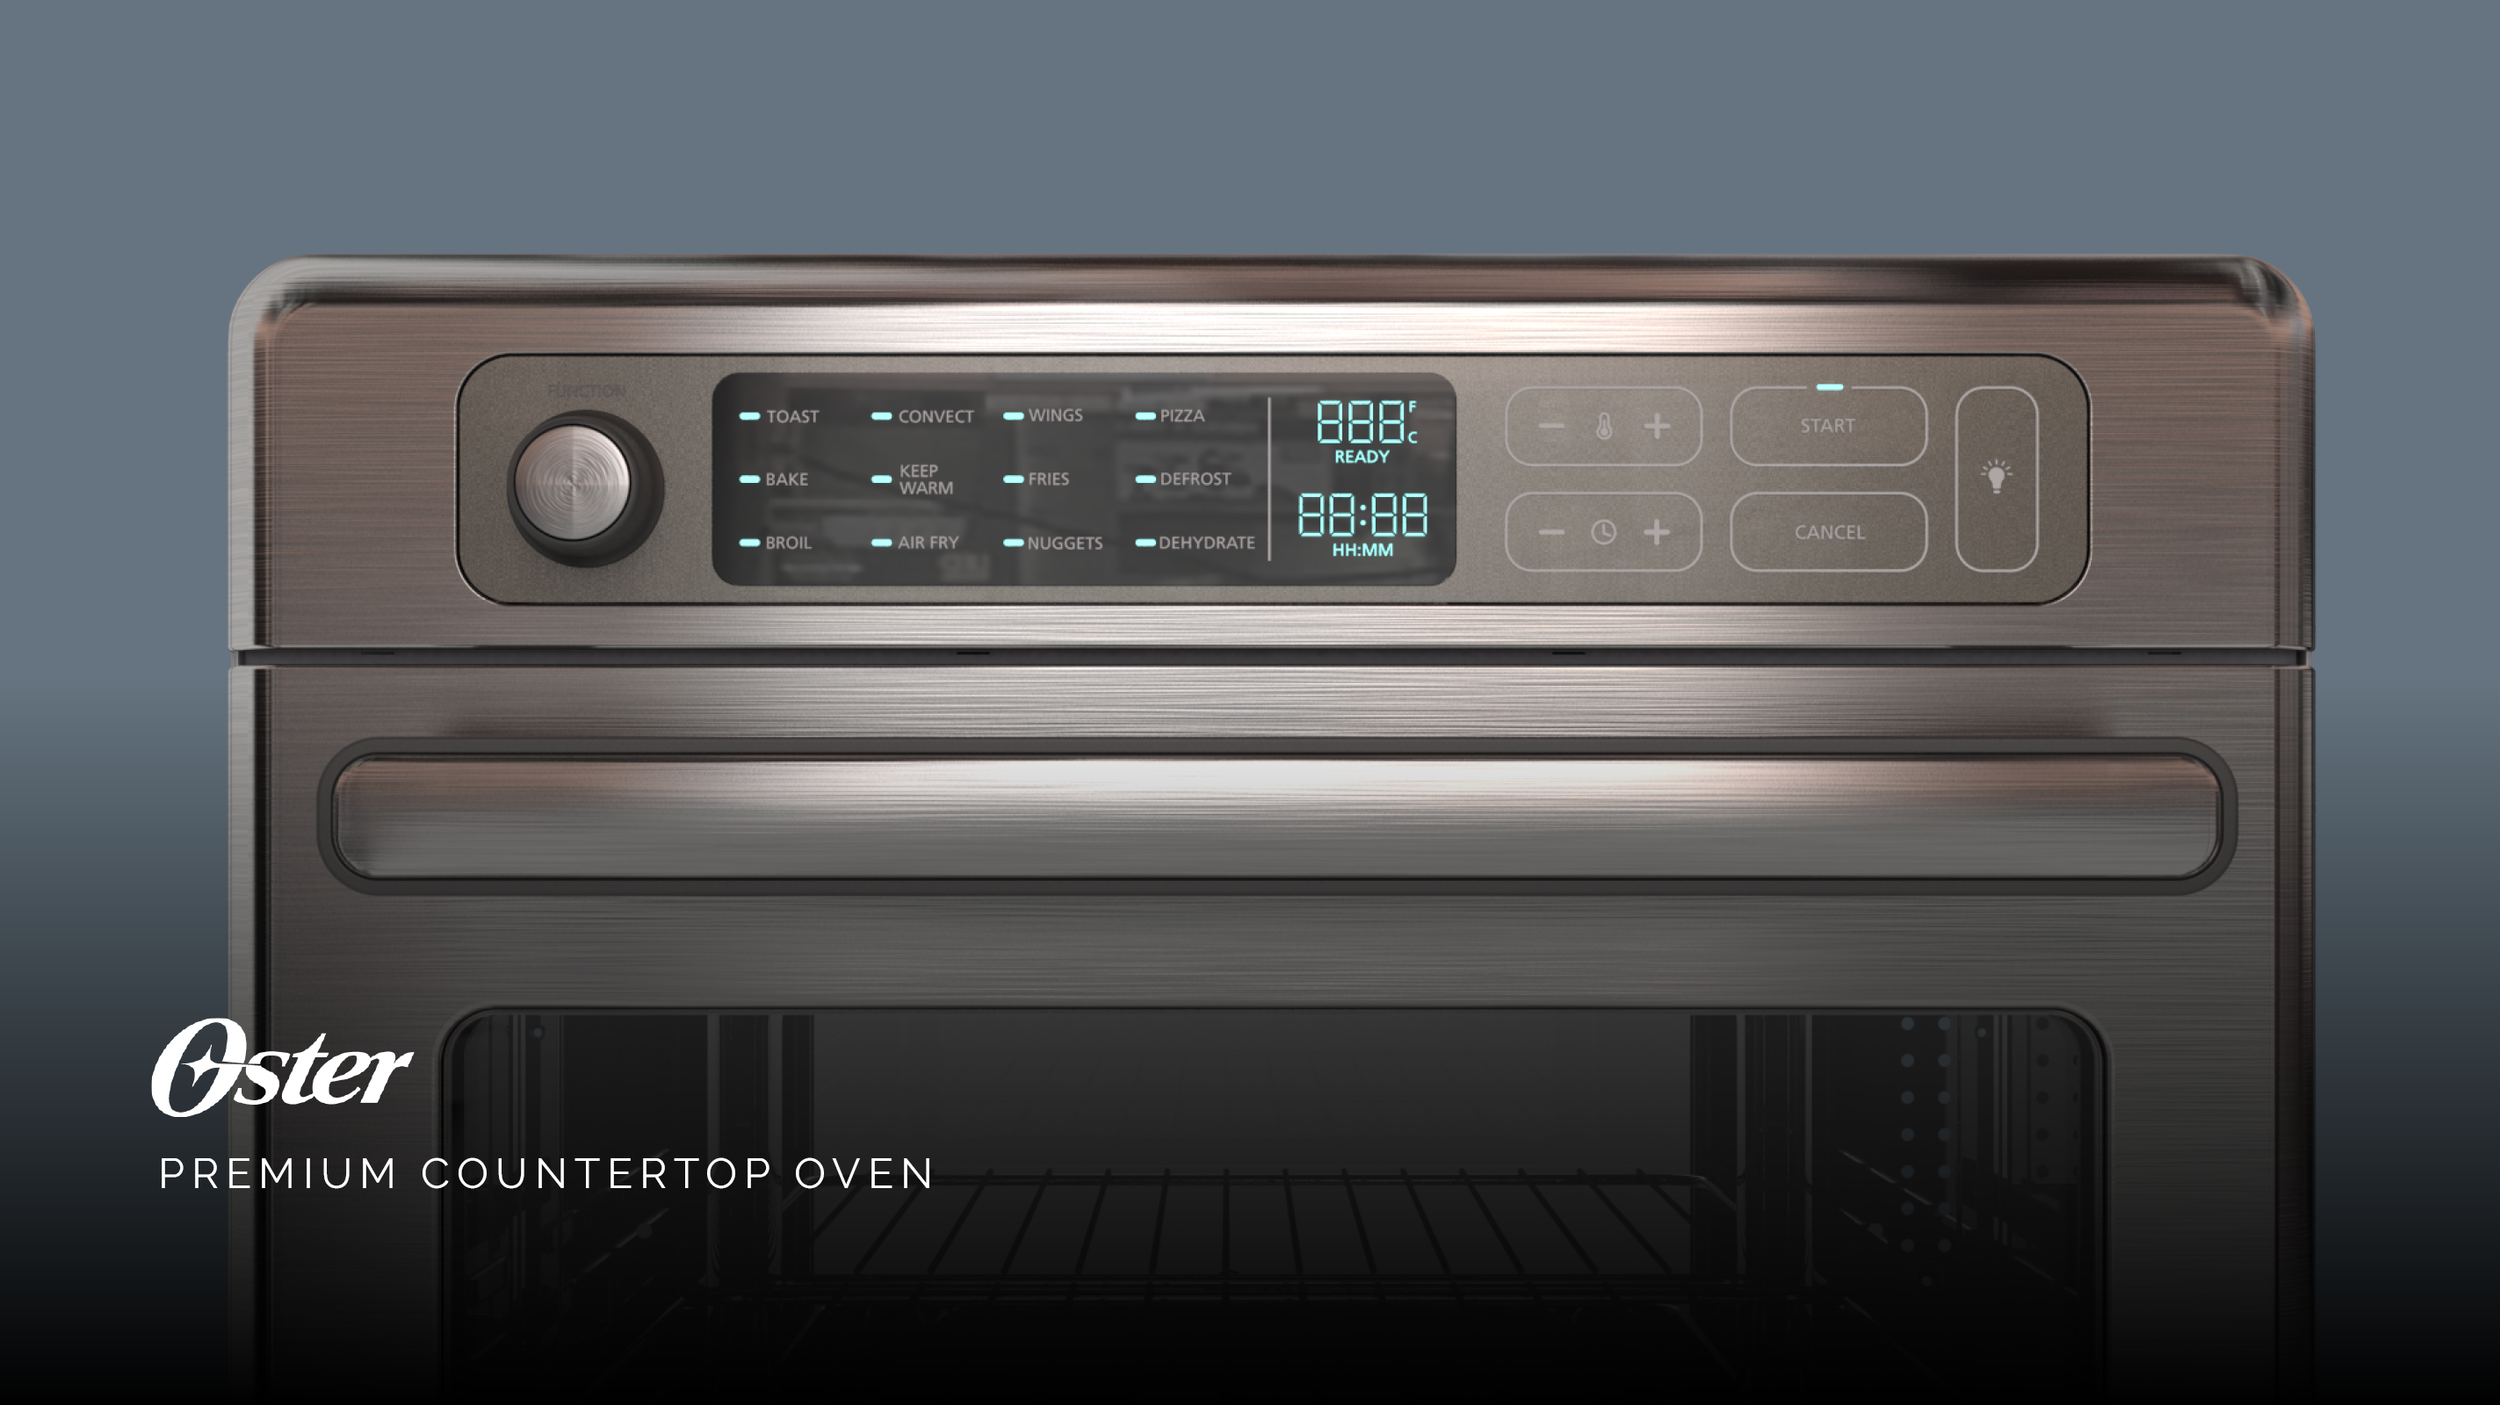 OSTER FRENCH DOOR OVEN — Charlotte Zale